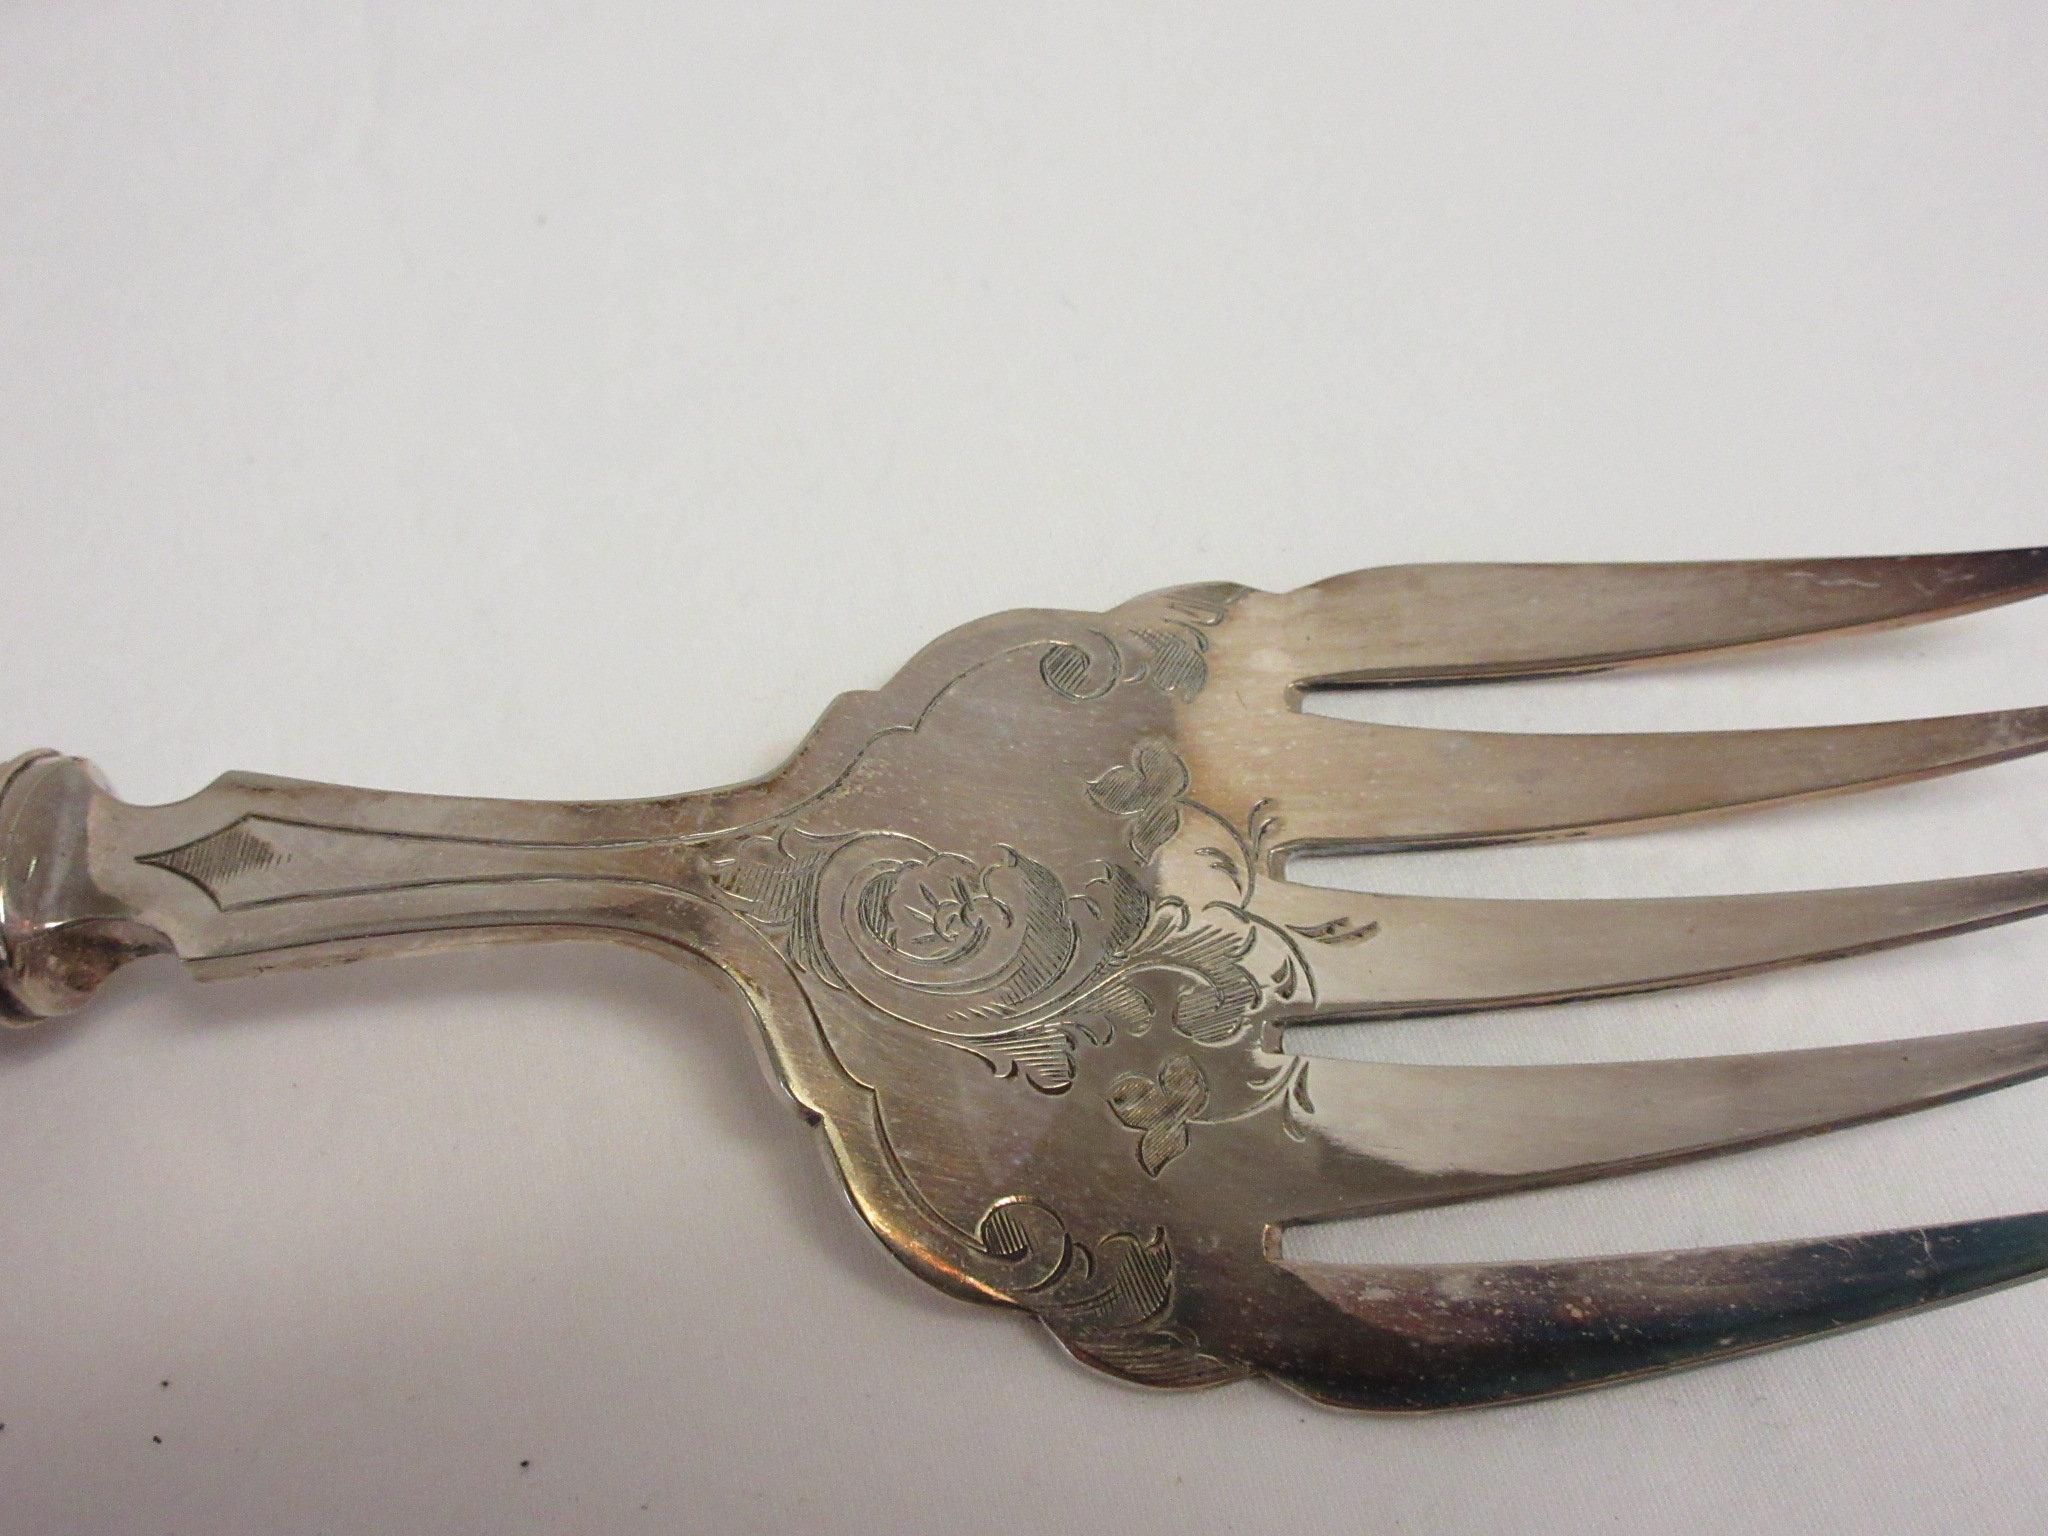 Pair Early English Sterling Fish Servers (Fork & Knife) w/ Pre Ban Ivory Handles